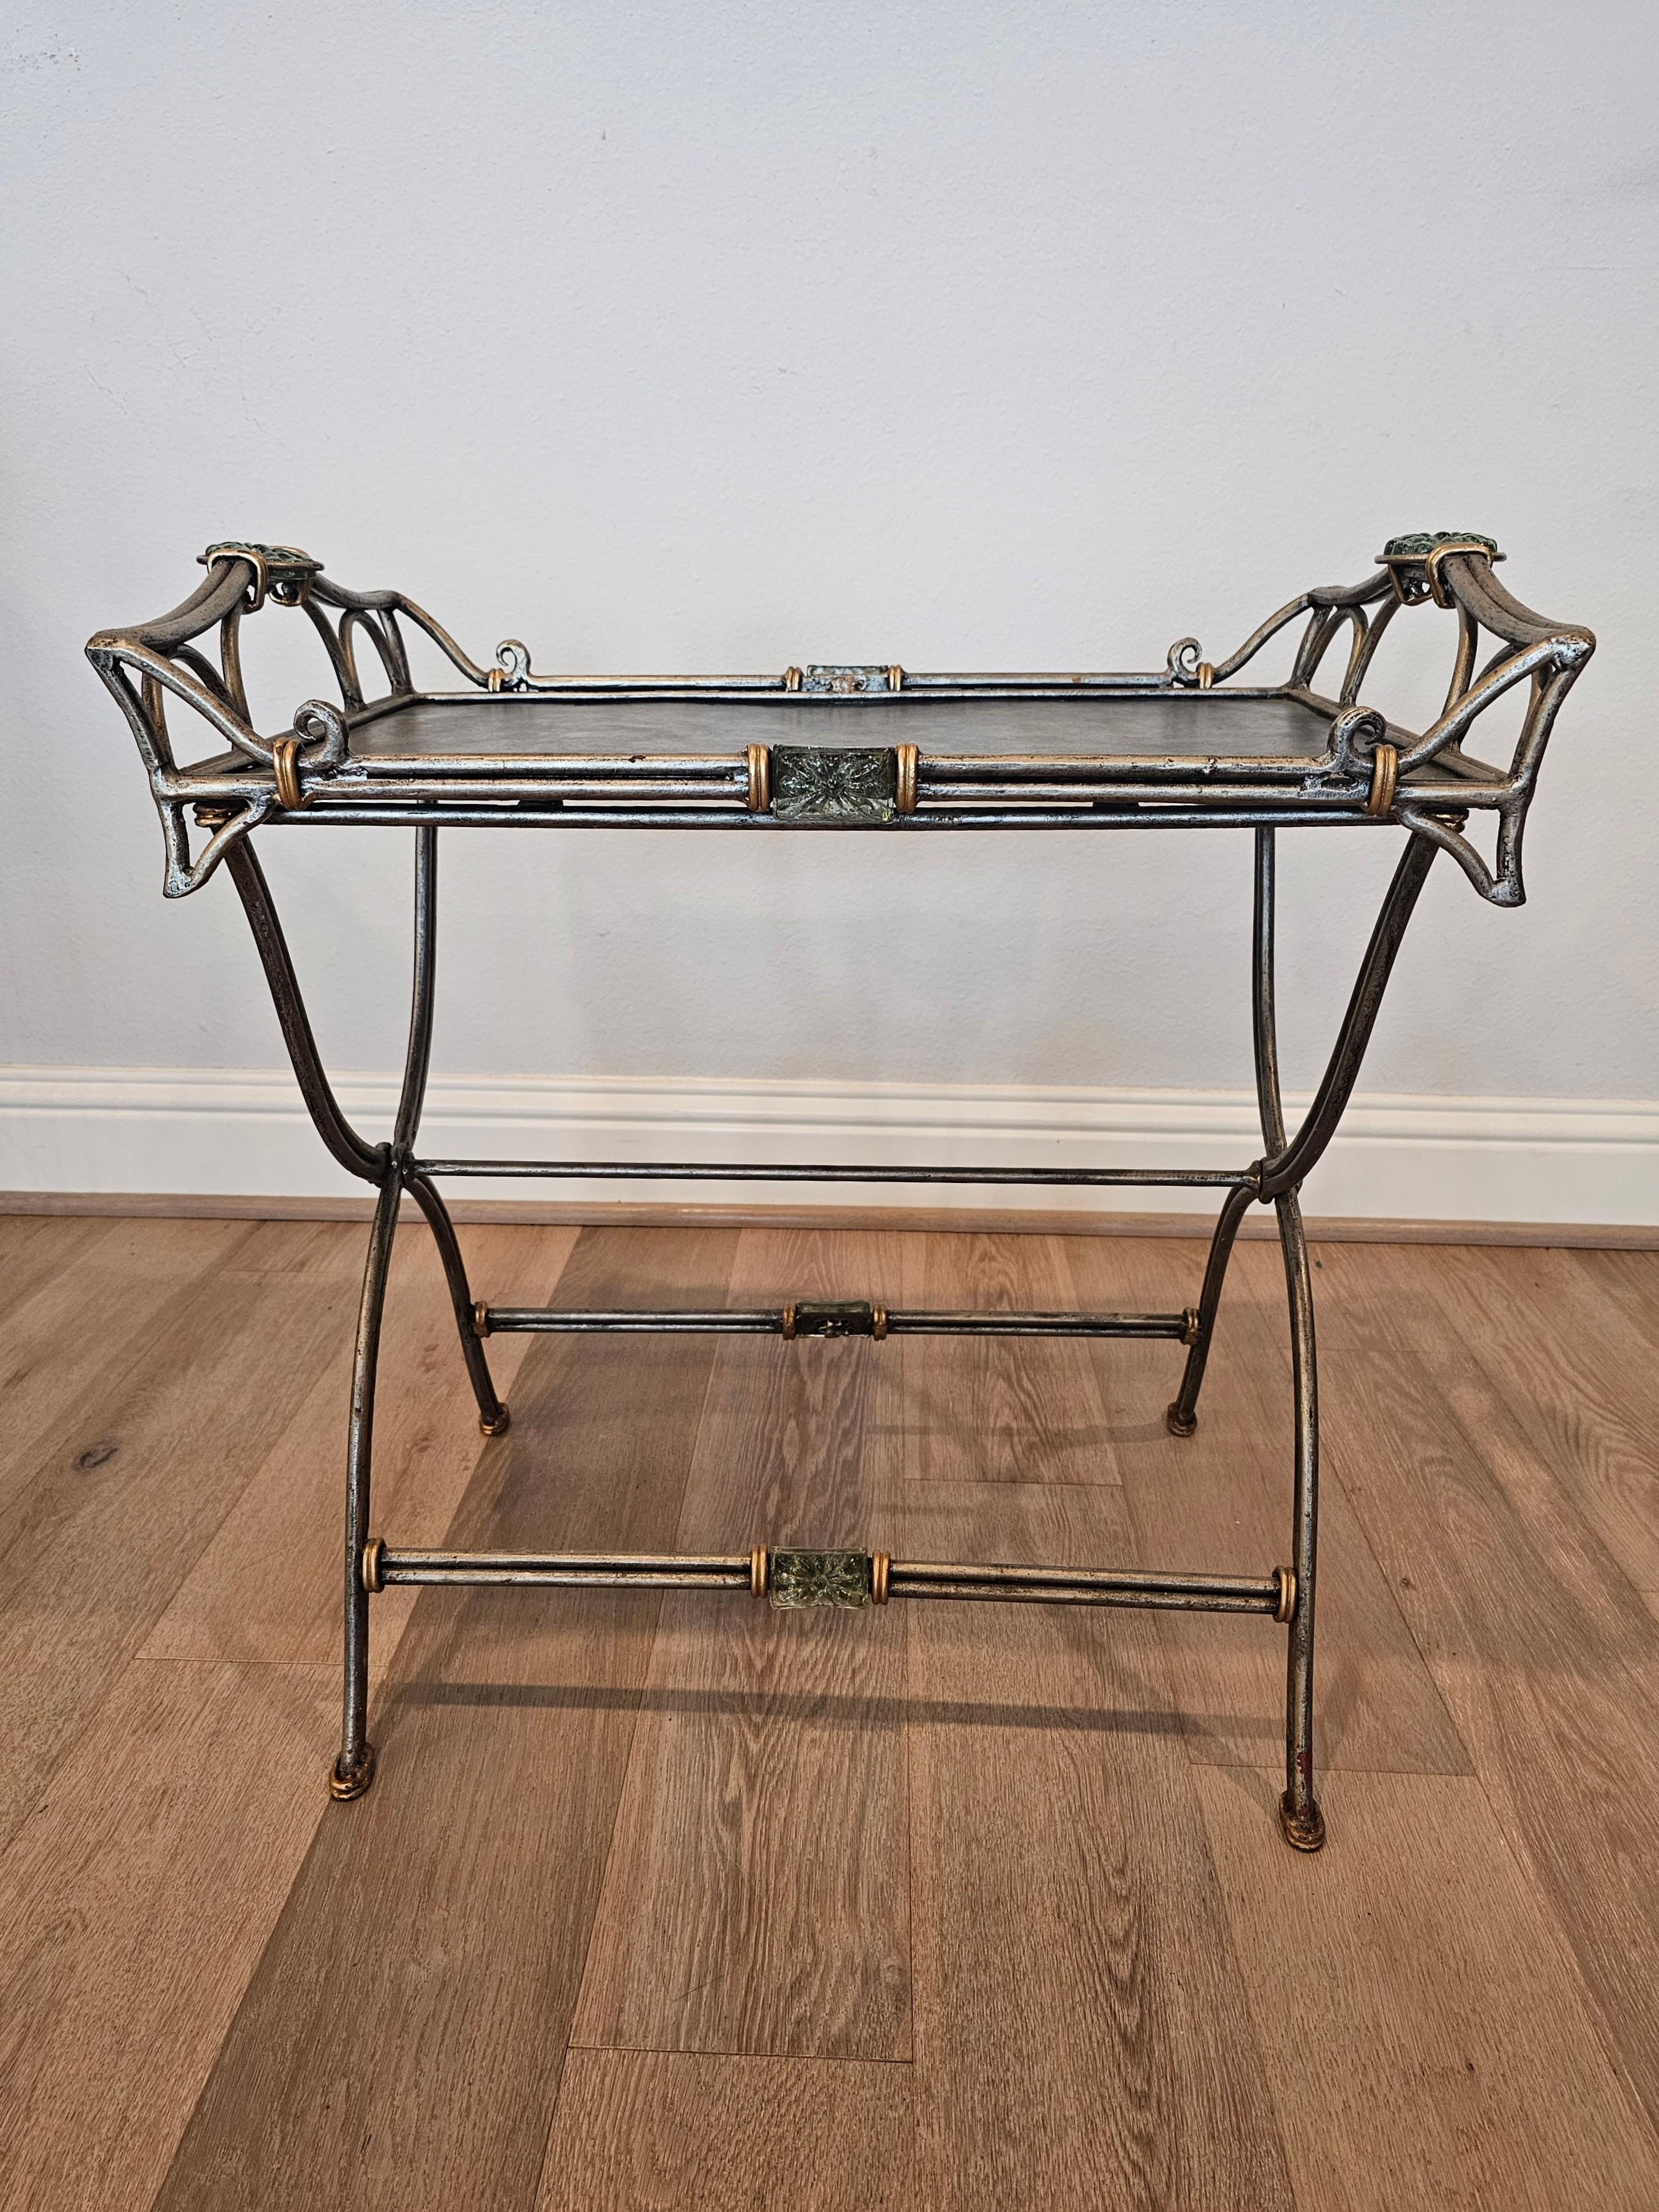 A rare and a bit unusual vintage silver and gold tone metal service table with decorative blue glass medallions, 20th century. 

Exceptionally executed modern contemporary sculptural form, featuring high-quality silvered wrought iron style metal